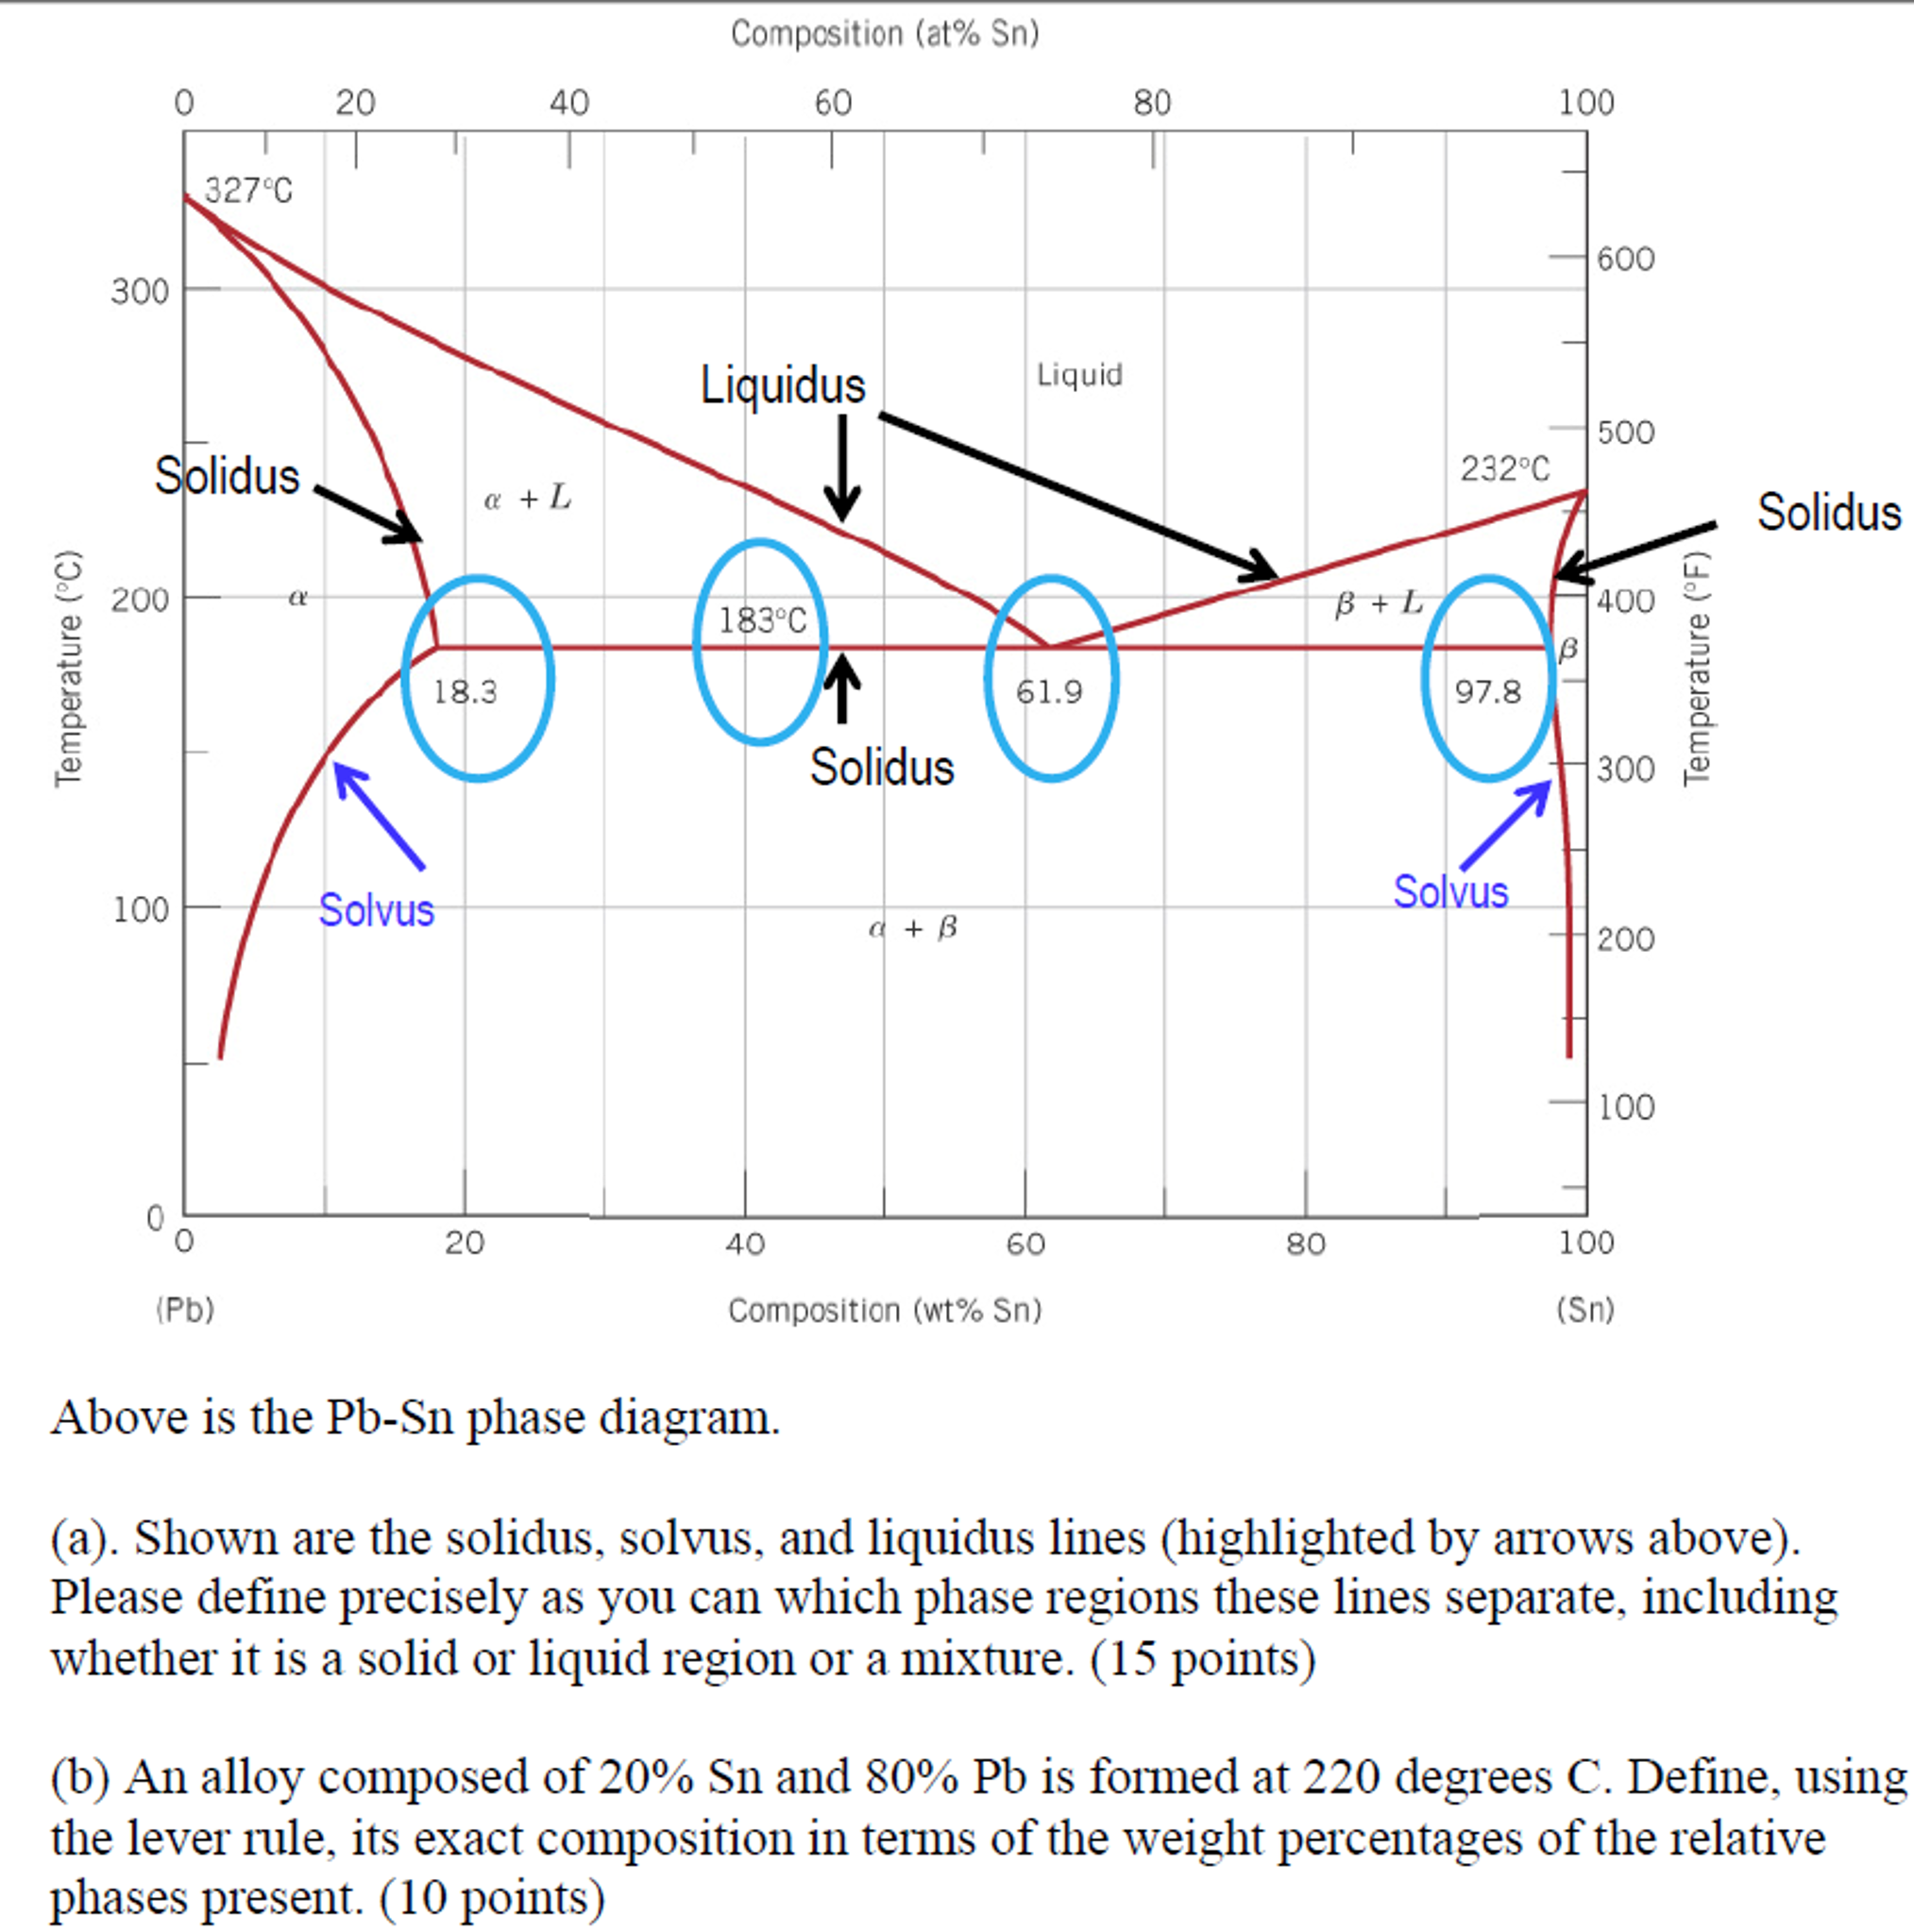 Above is the PbSn phase diagram. Shown are the